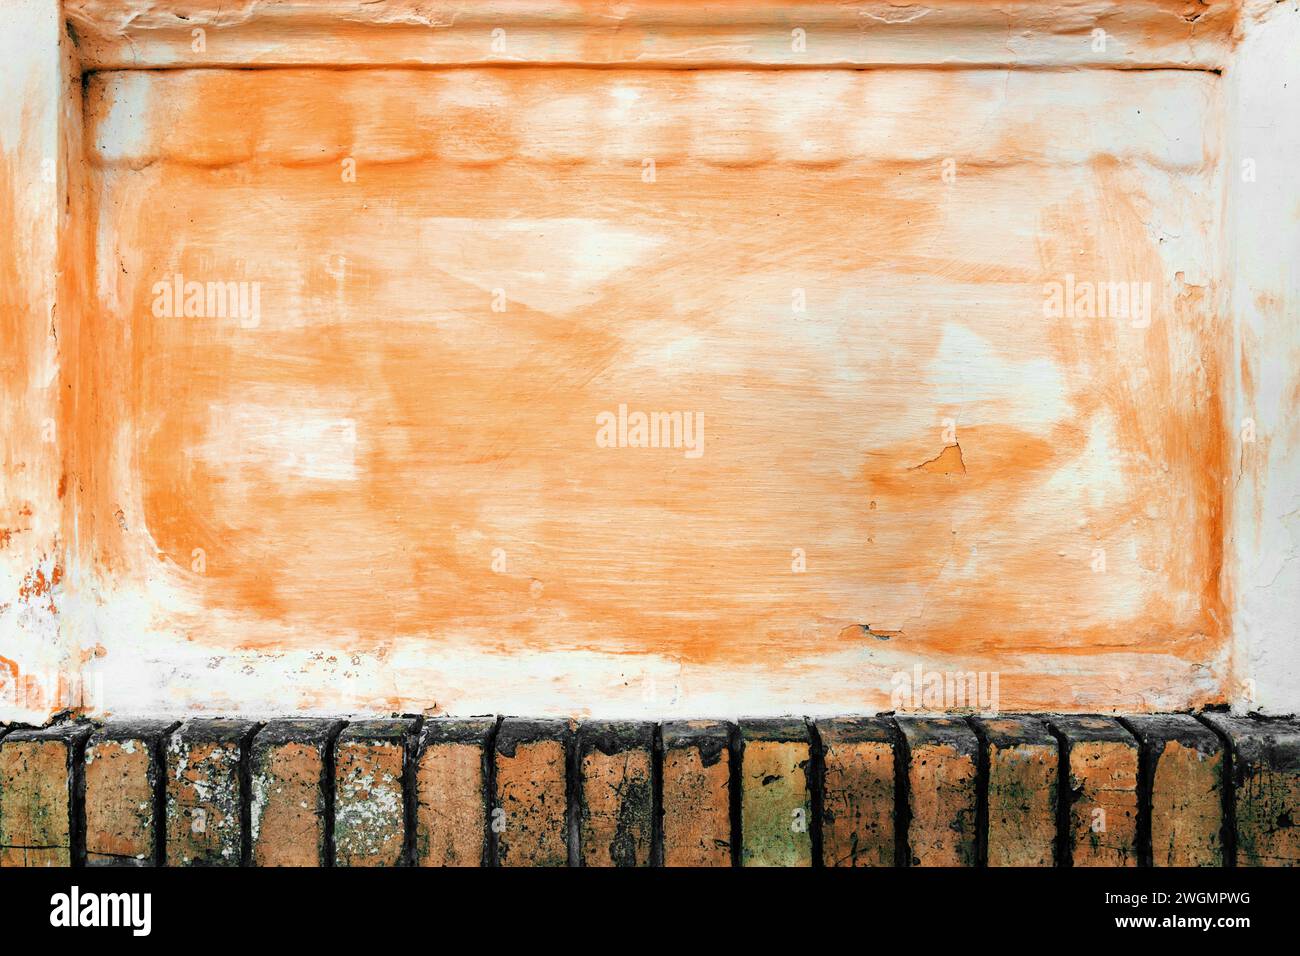 Grunge texture painted in peach fuzz, old wall surface as background and design element Stock Photo